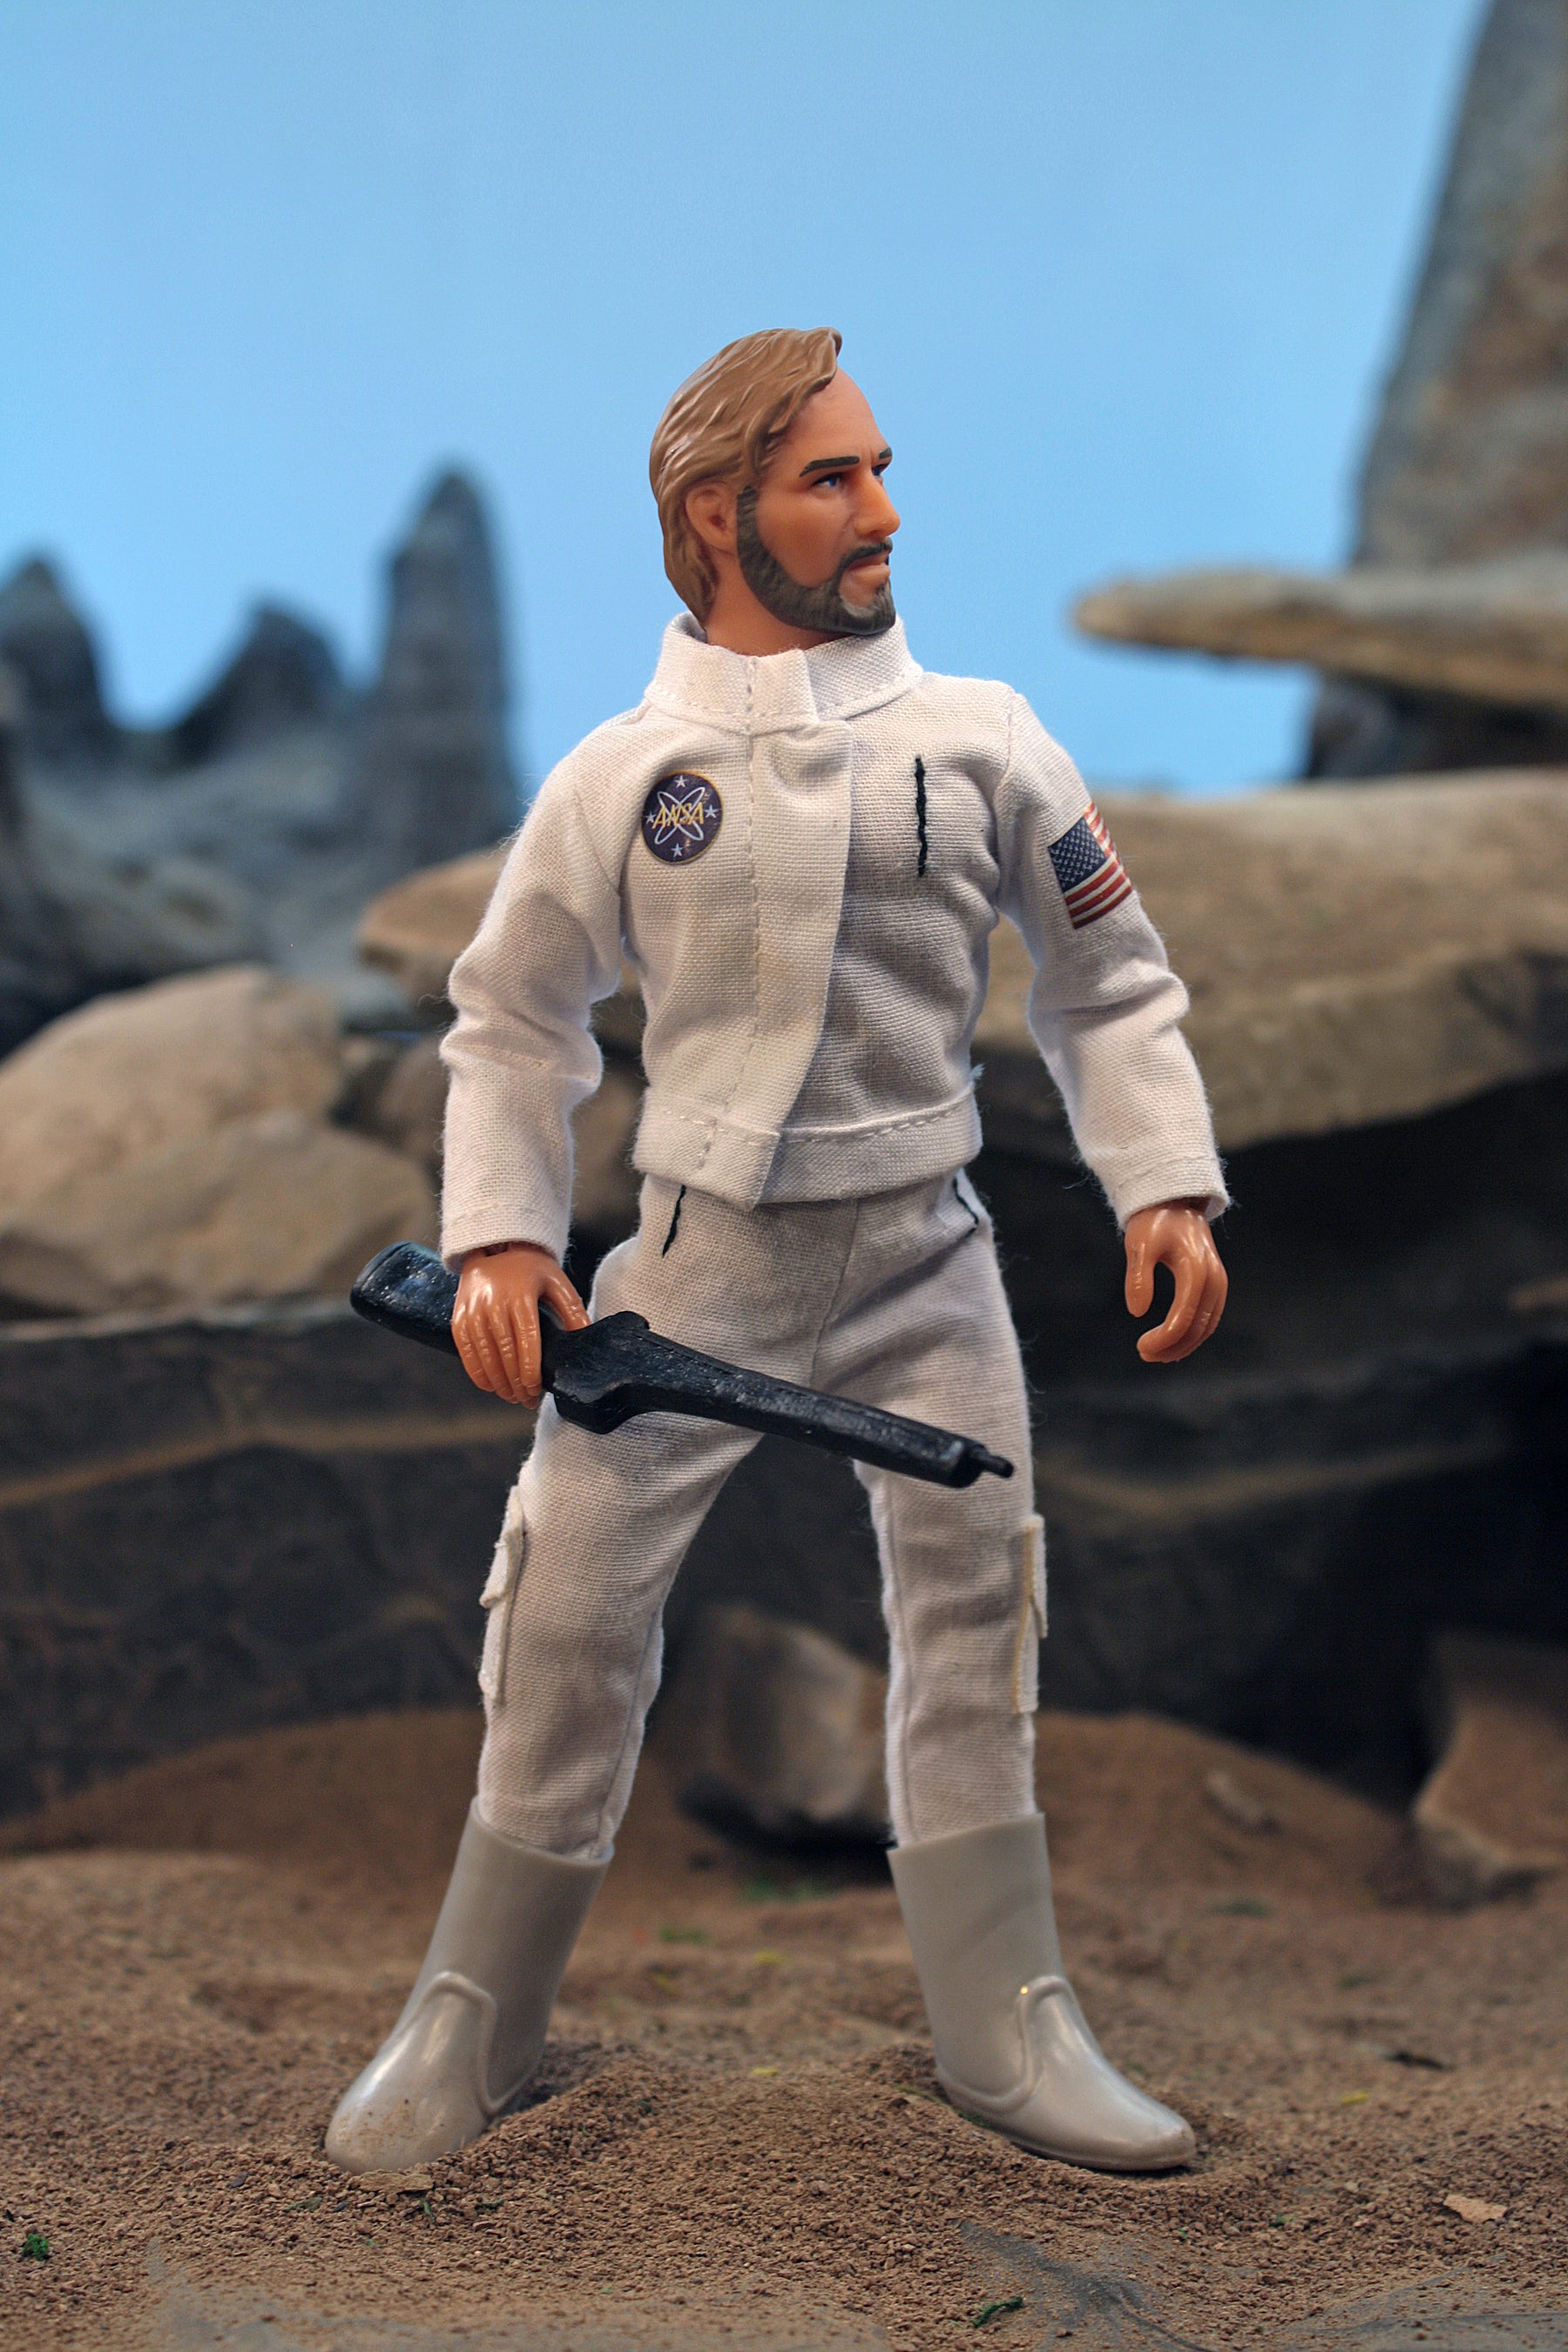 Mego Planet of The Apes Wave 15 - Taylor (Variant) 8" Action Figure